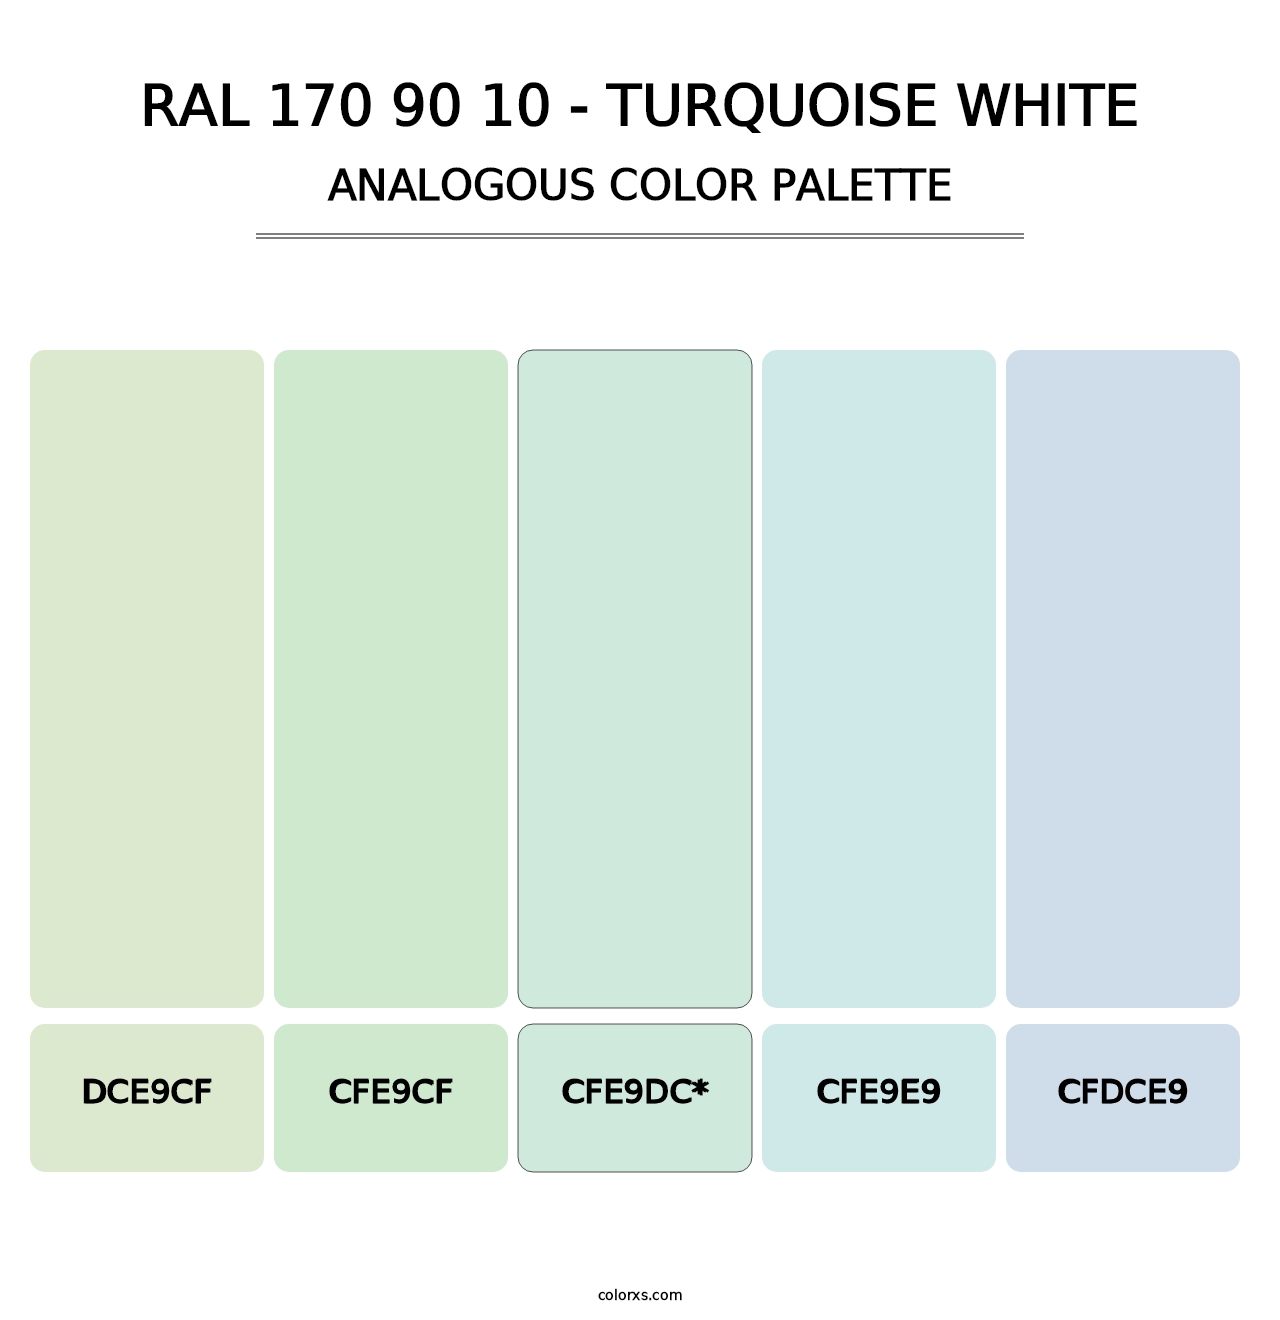 RAL 170 90 10 - Turquoise White - Analogous Color Palette